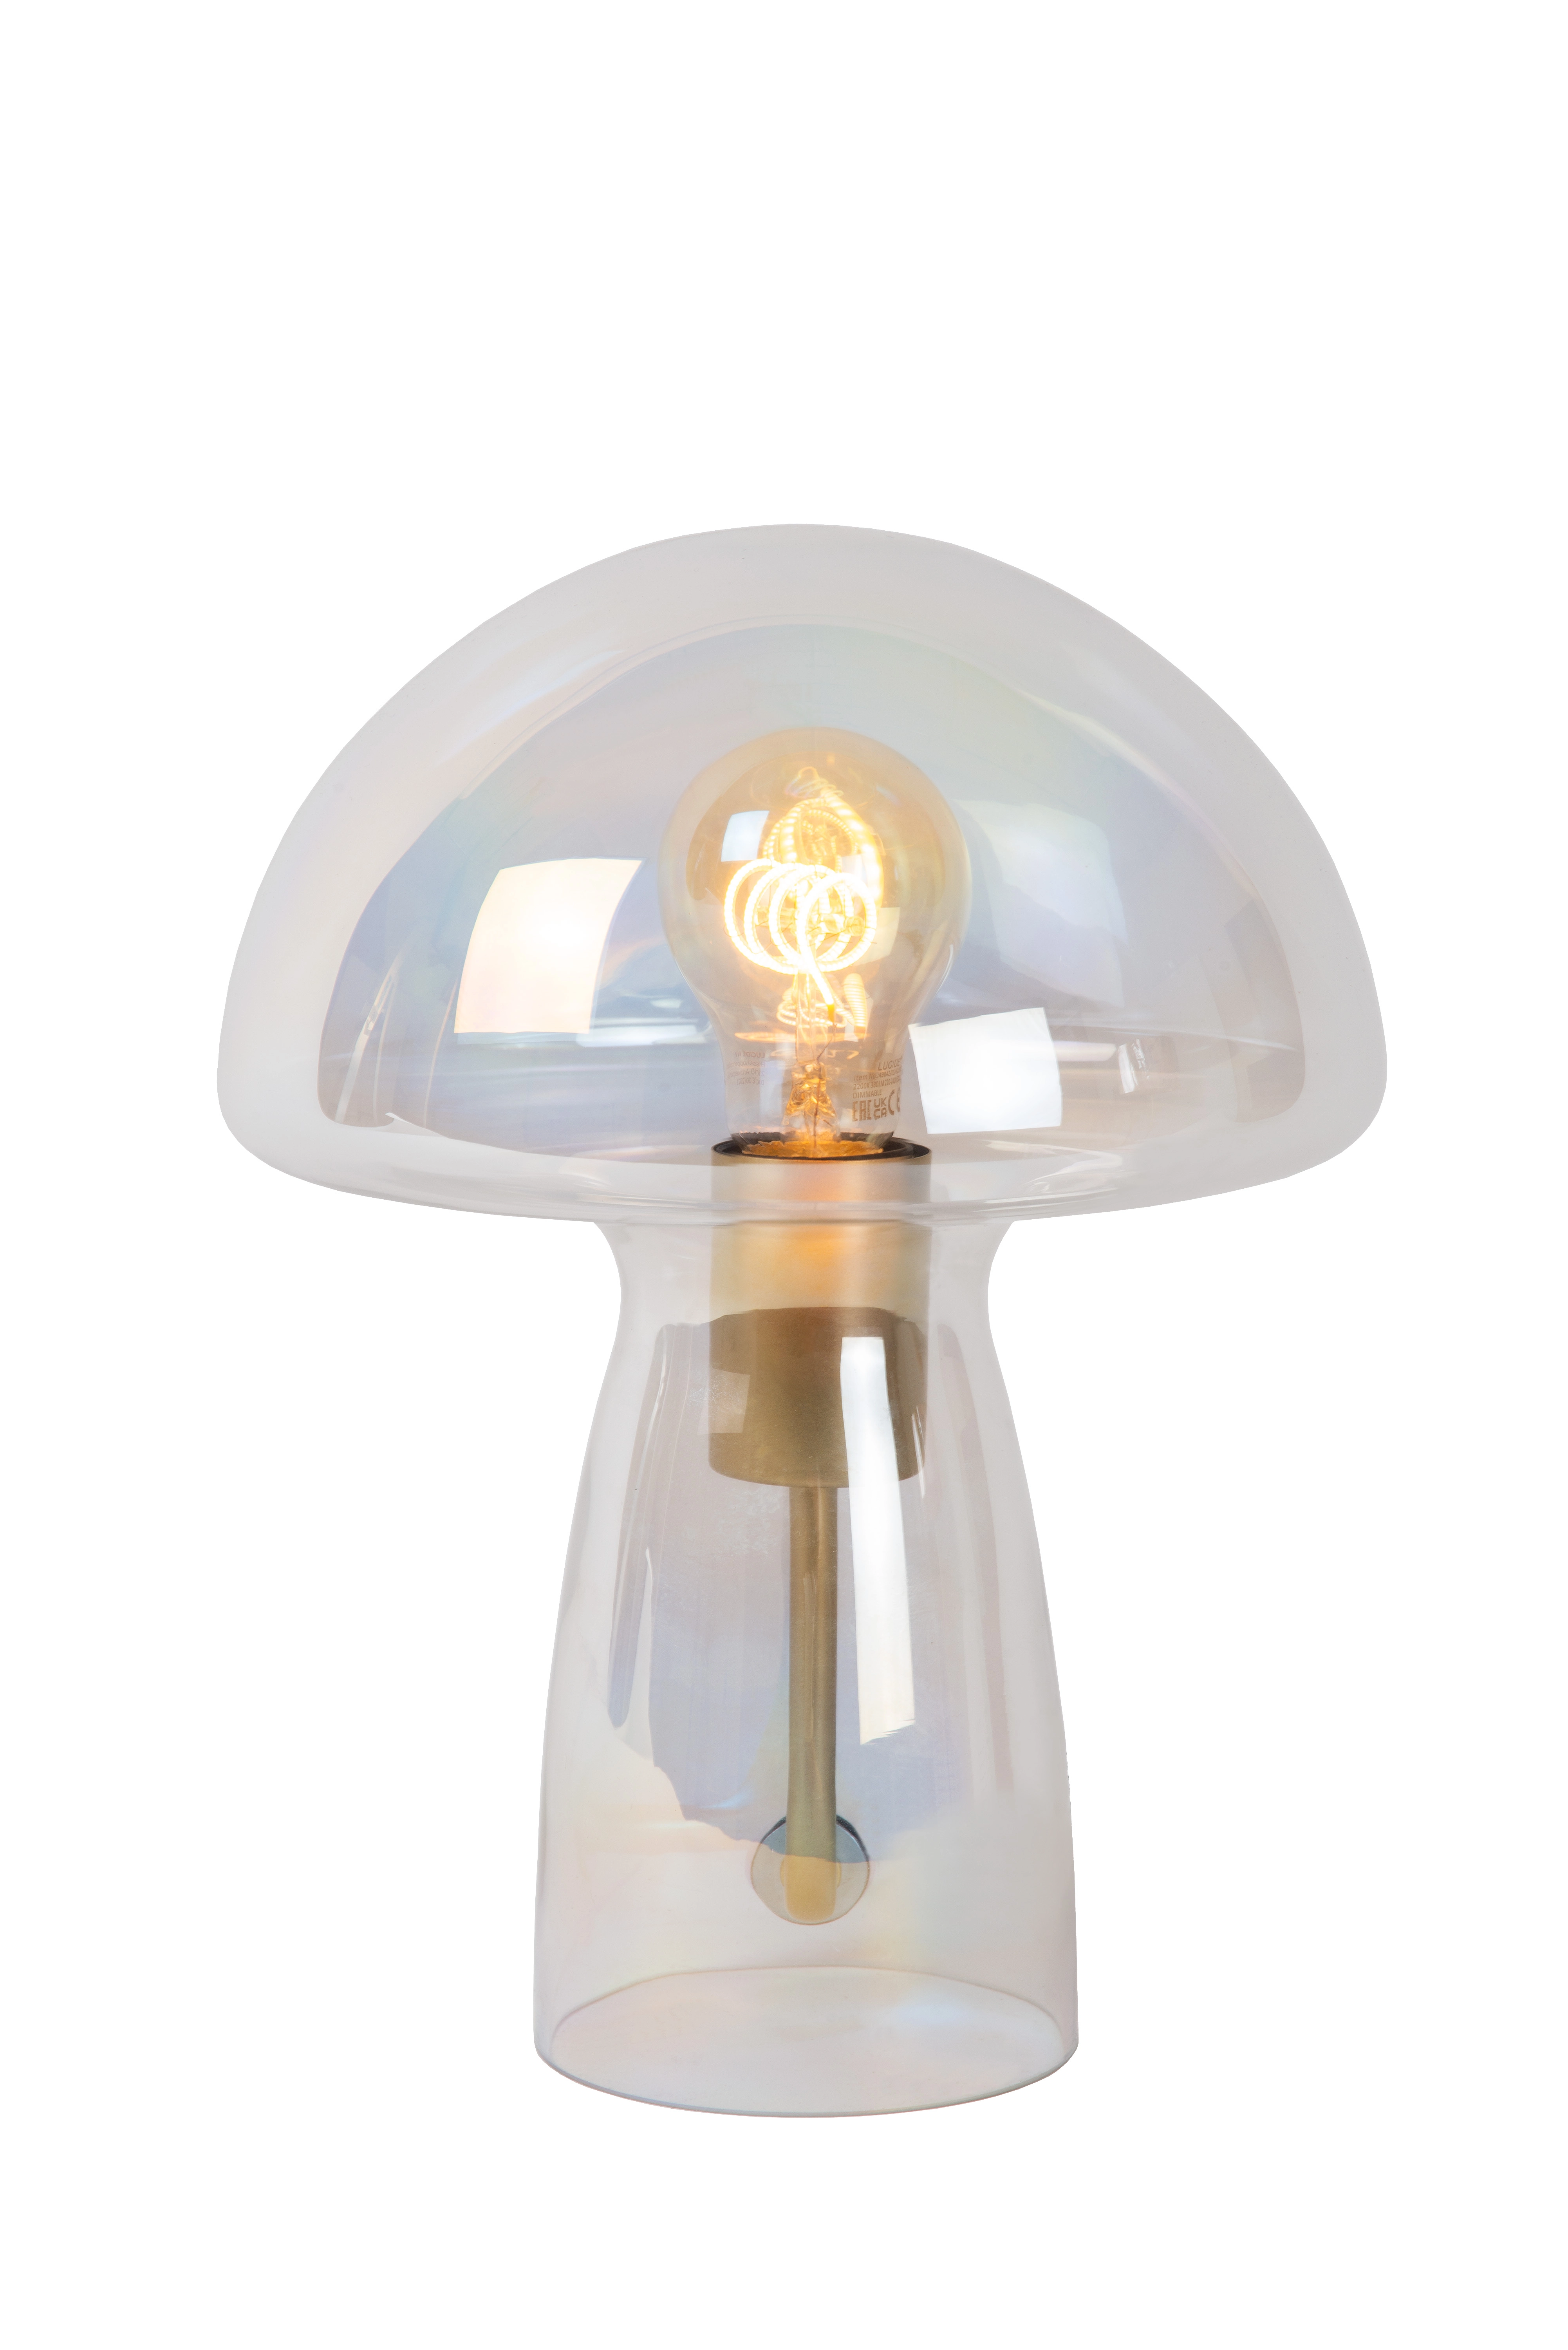 LU 10514/01/60 Lucide FUNGO - Table lamp - 1xE27 - Transparant